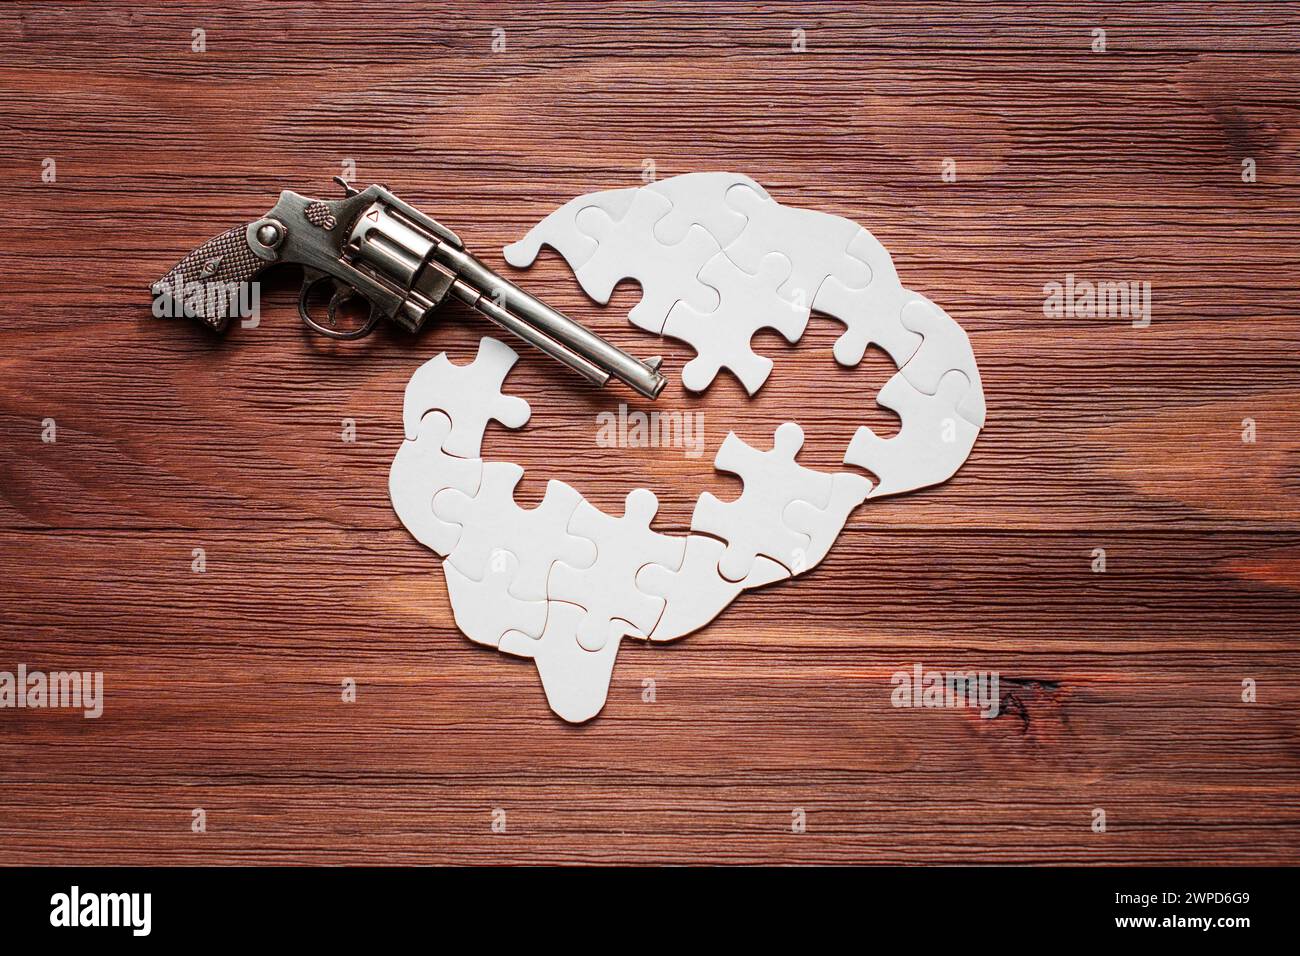 Revolver inserted into a human brain puzzle, set against a textured wooden backdrop. With several missing puzzle pieces, the composition metaphoricall Stock Photo